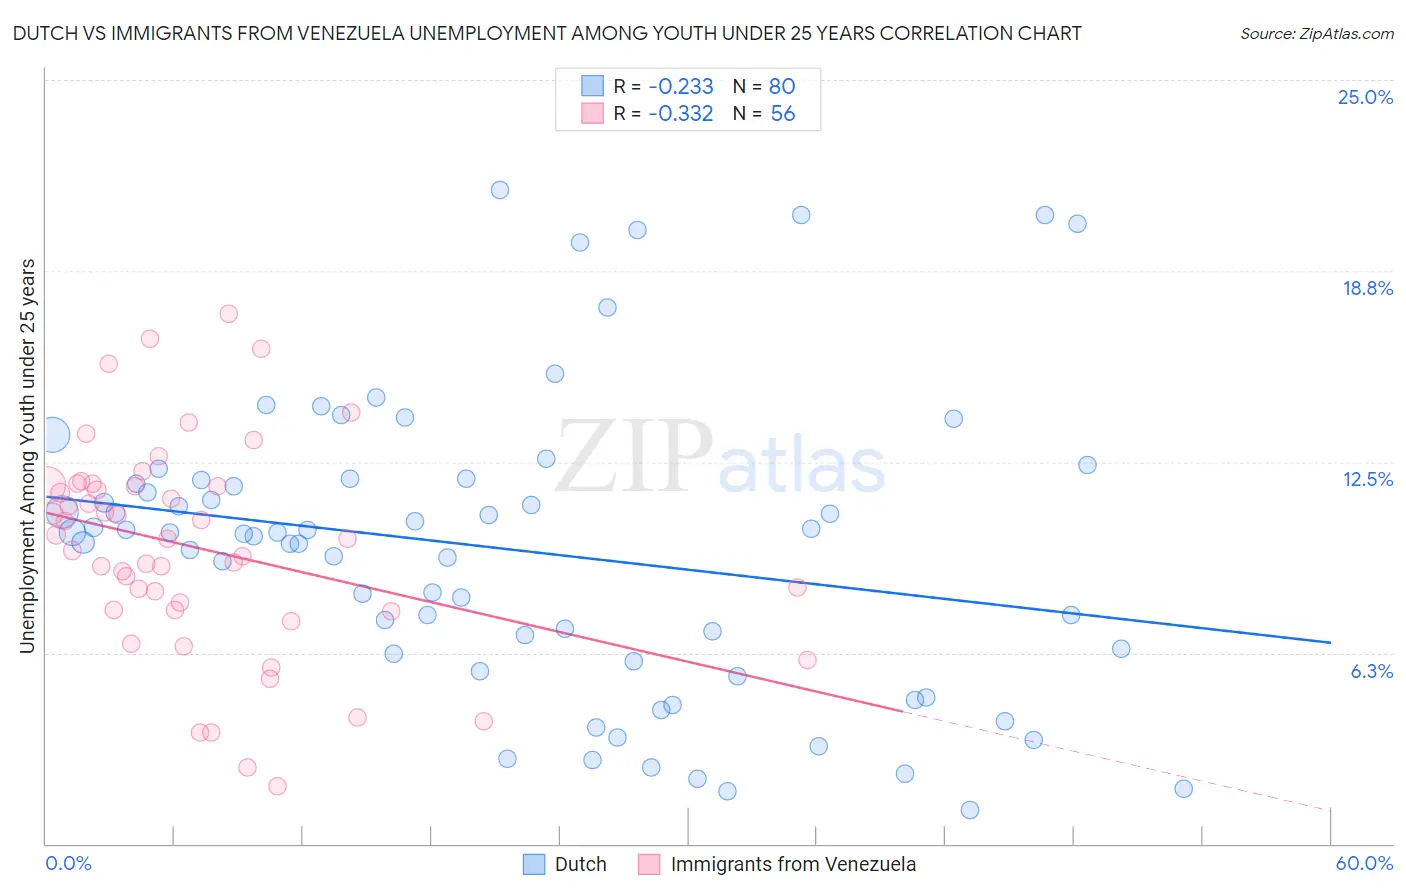 Dutch vs Immigrants from Venezuela Unemployment Among Youth under 25 years